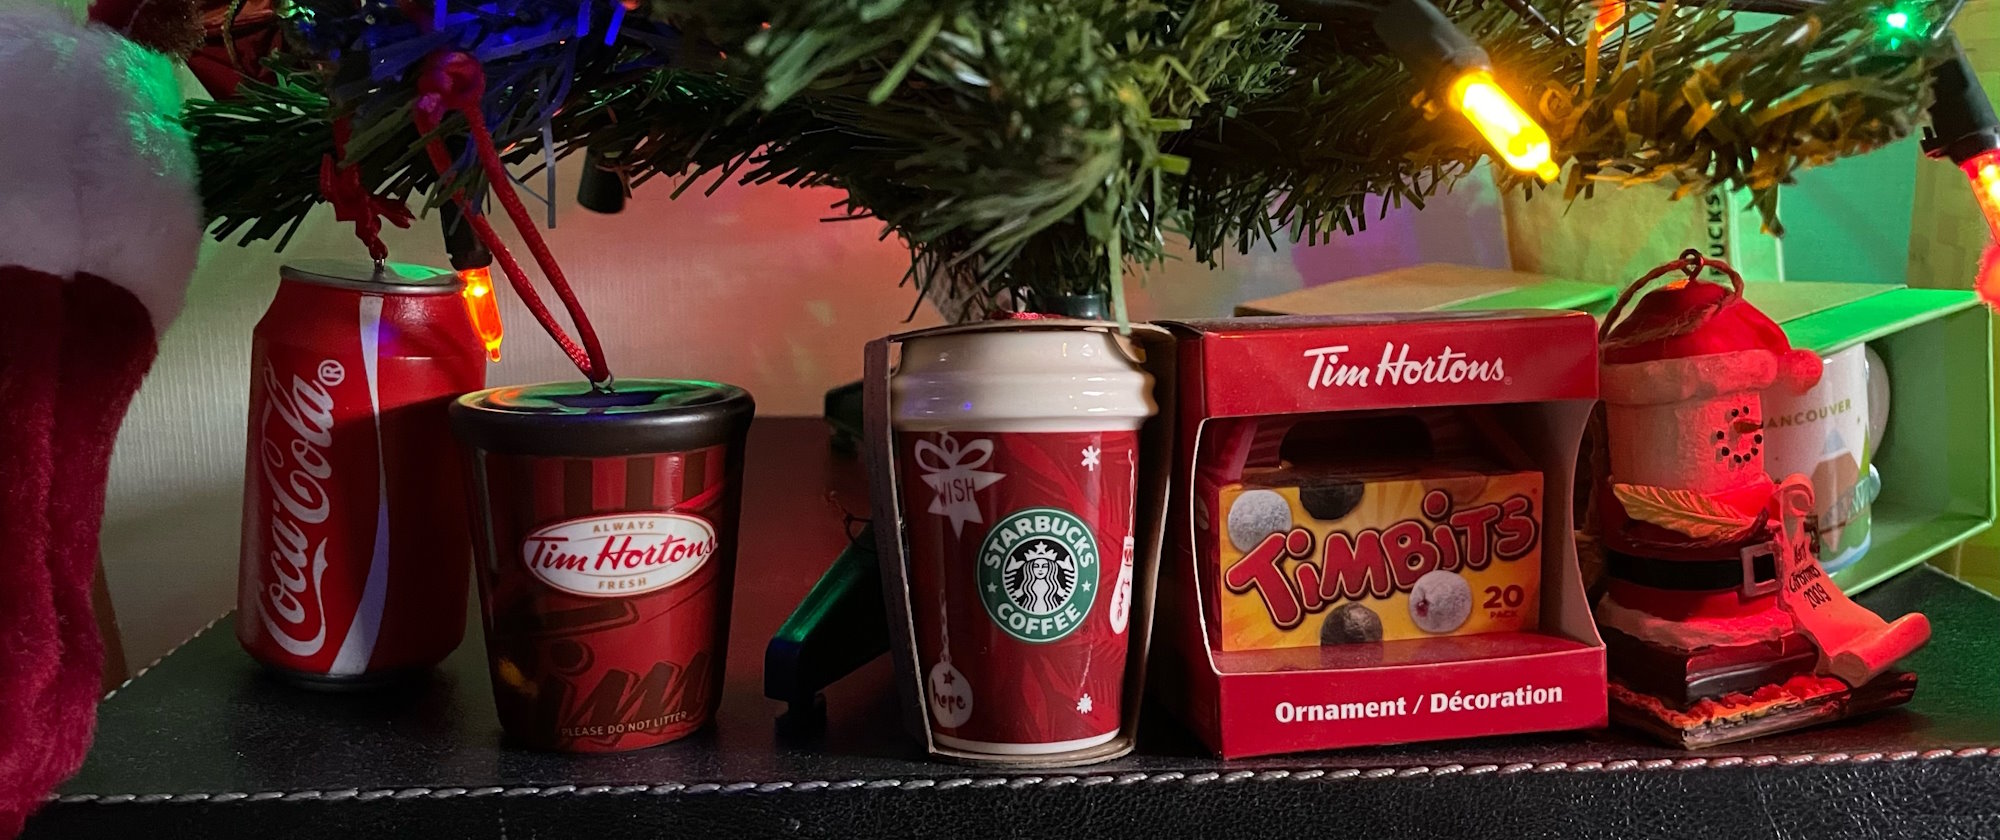 The bottom of a small plastic xmas tree standing on a black faux leather banker’s box. A row of ornaments are arrayed beneath the tree like presents: a Coca-Cola can, a Tim Hortons coffee cup, a Starbucks cup, a Timbits box, a marshmallow dressed like Santa sitting on a graham cracker, a Starbucks mug that says Vancouver.